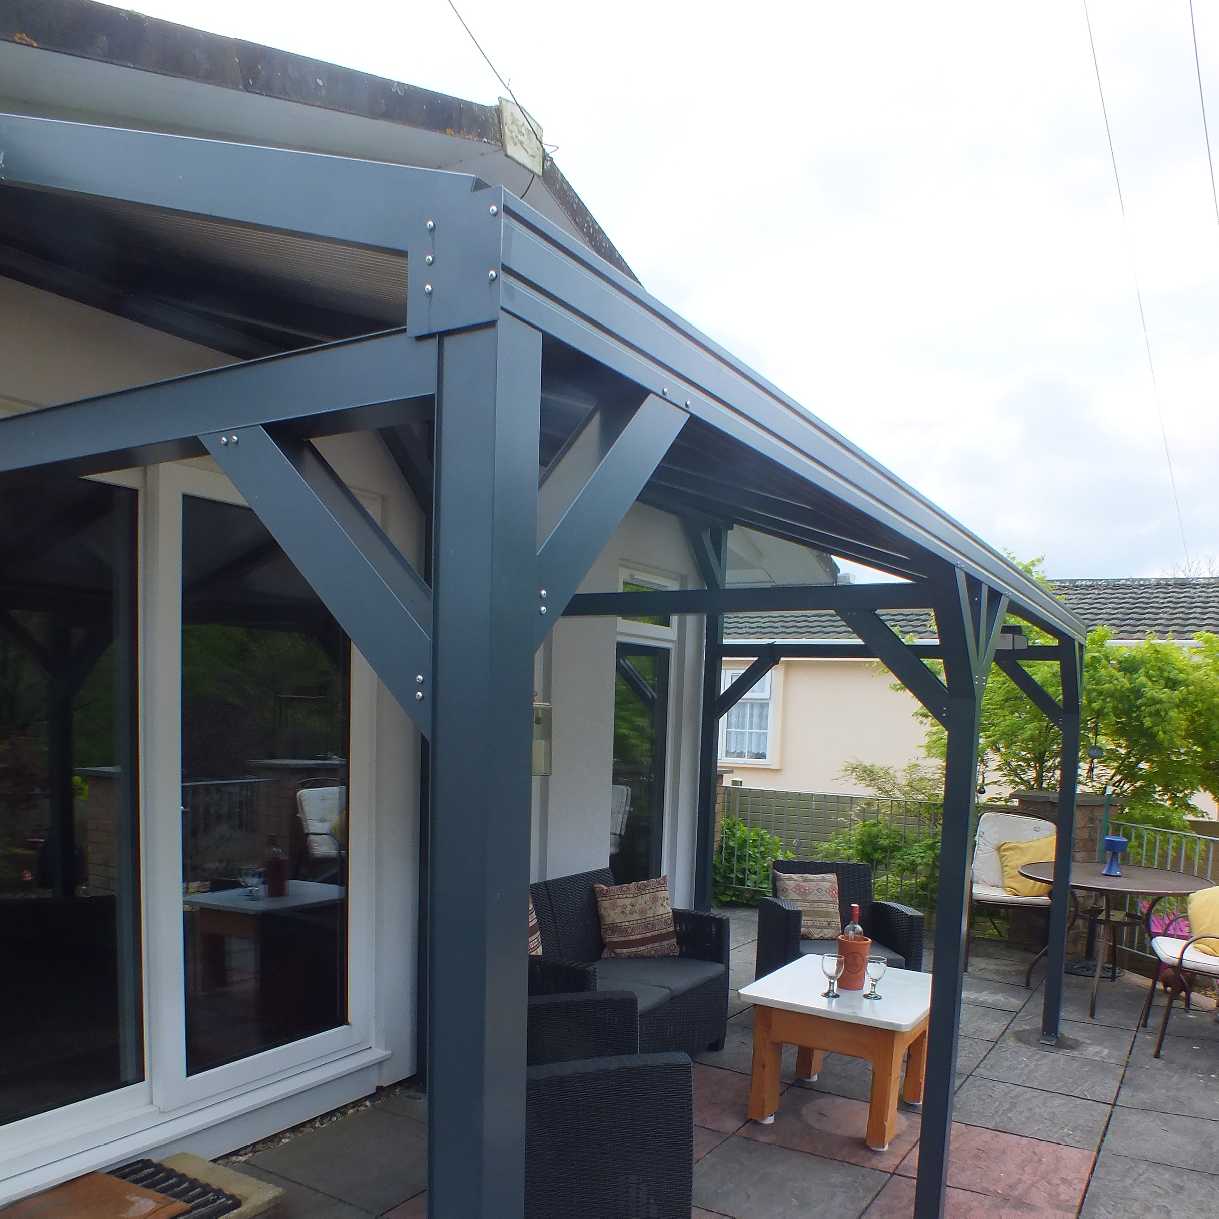 Affordable Omega Smart Free-Standing, Anthracite Grey MonoPitch Roof Canopy with 16mm Polycarbonate Glazing - 8.4m (W) x 3.5m (P), (8) Supporting Posts